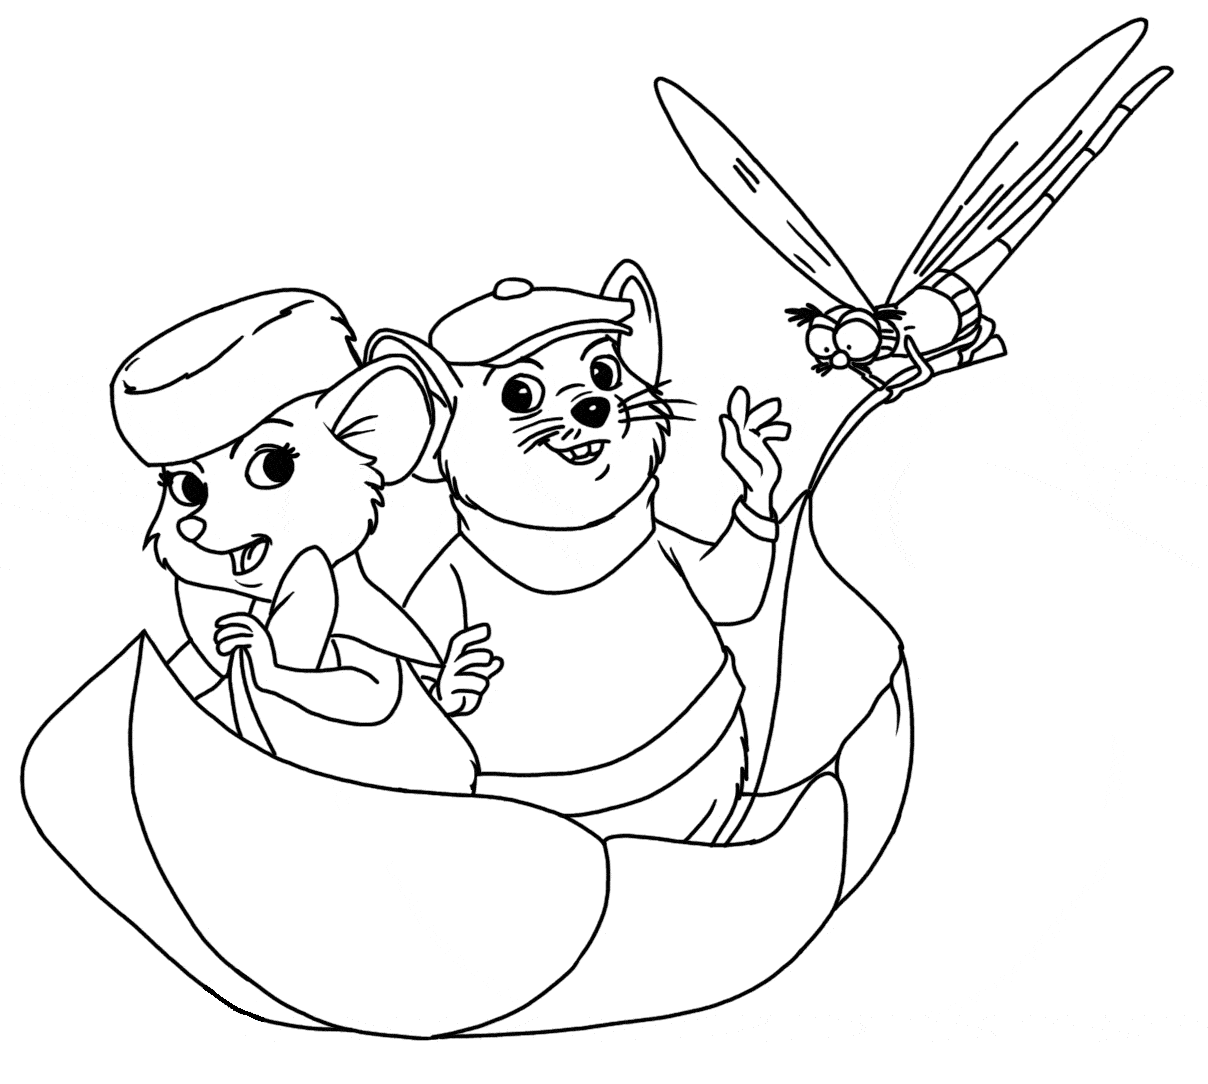 Bernard, Bianca and Evinrude Coloring Pages